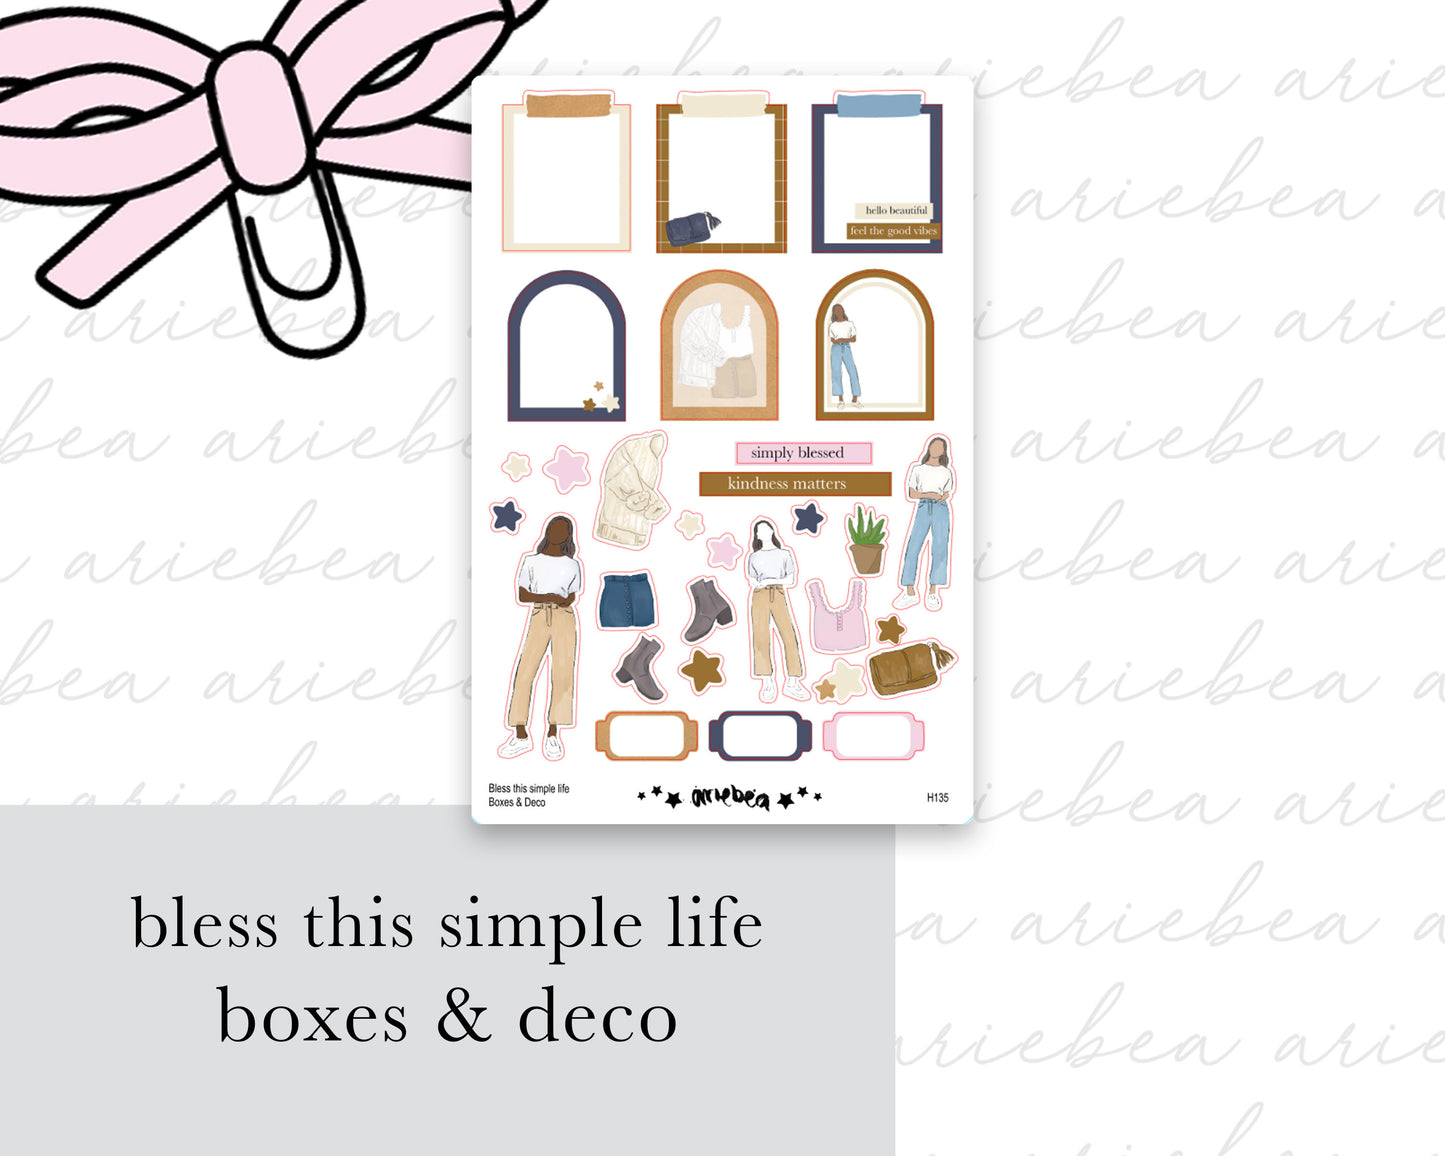 Bless This Simple Life Boxes & Deco